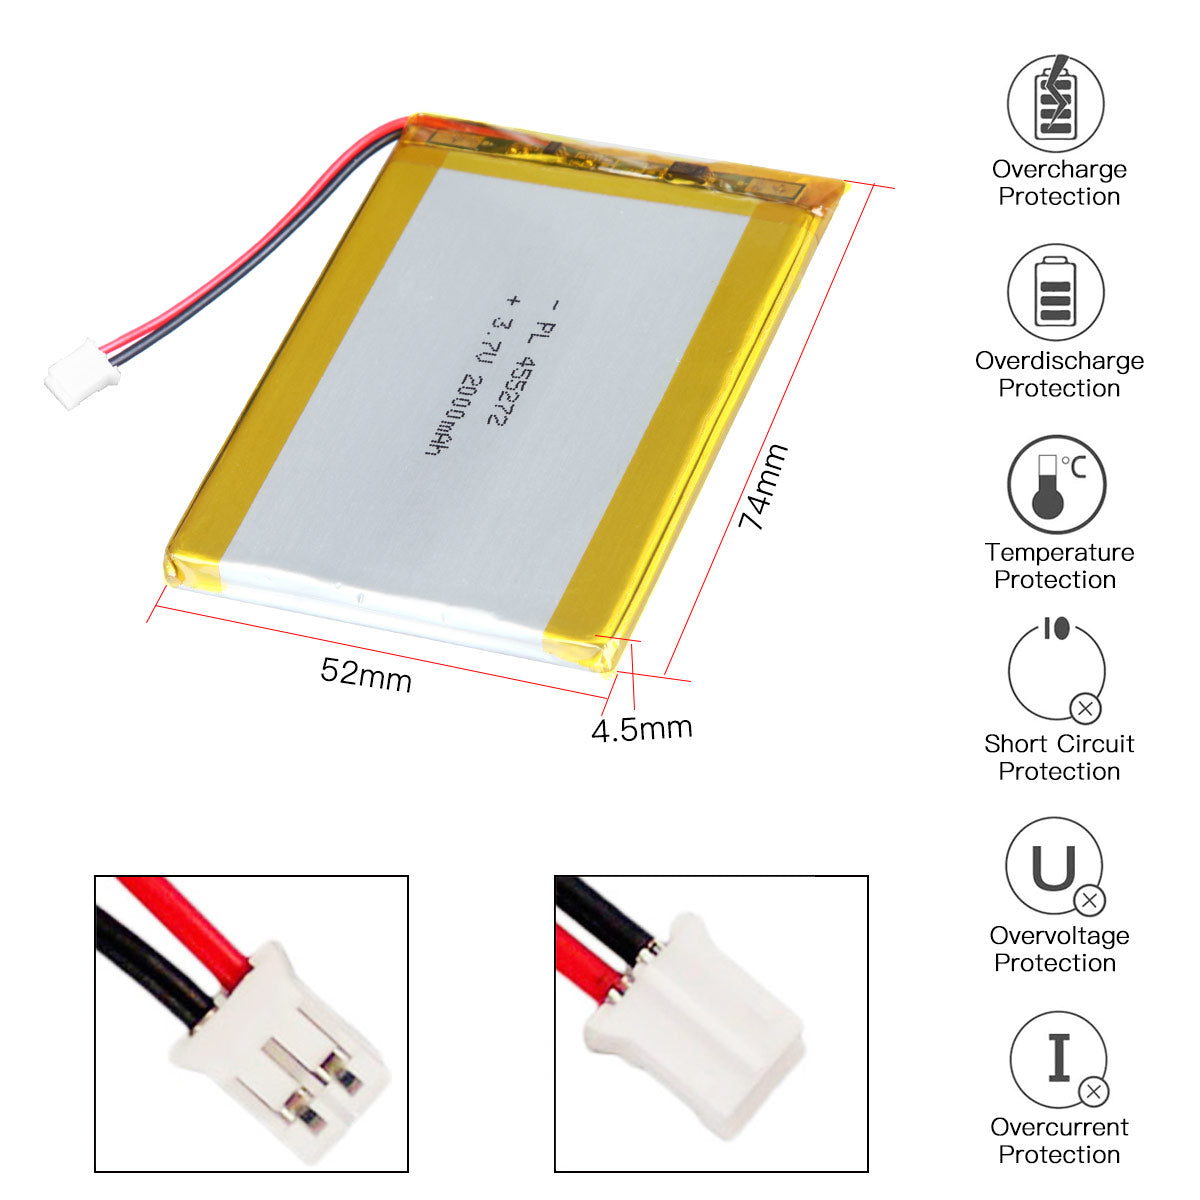 YDL 3.7V 2000mAh 455272 Rechargeable Lithium Polymer Battery Length 74mm